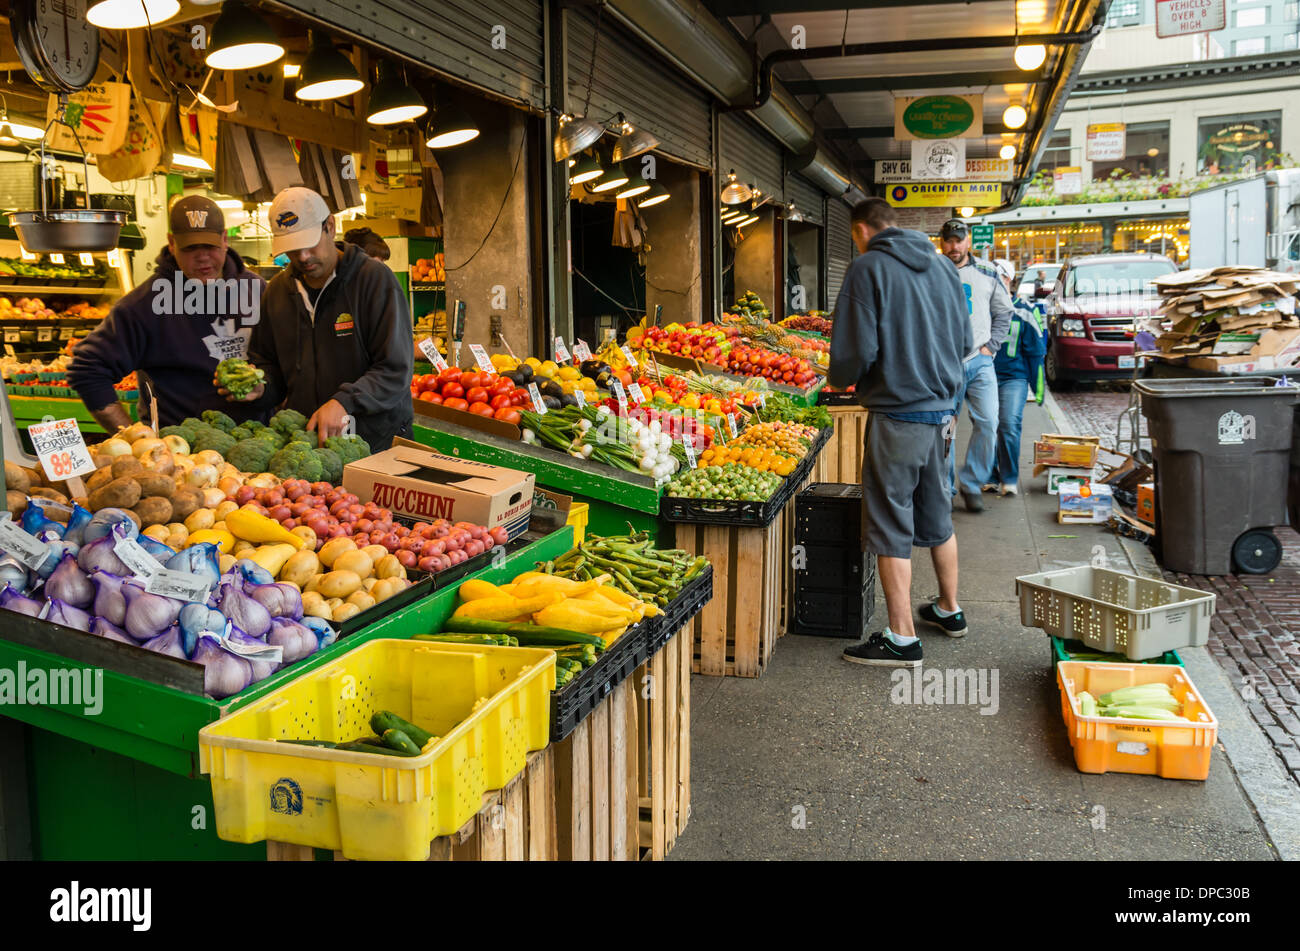 Shoppers selecting fruits and vegetables at an open air market stall. Pike Place Market, Seattle, Washington Stock Photo